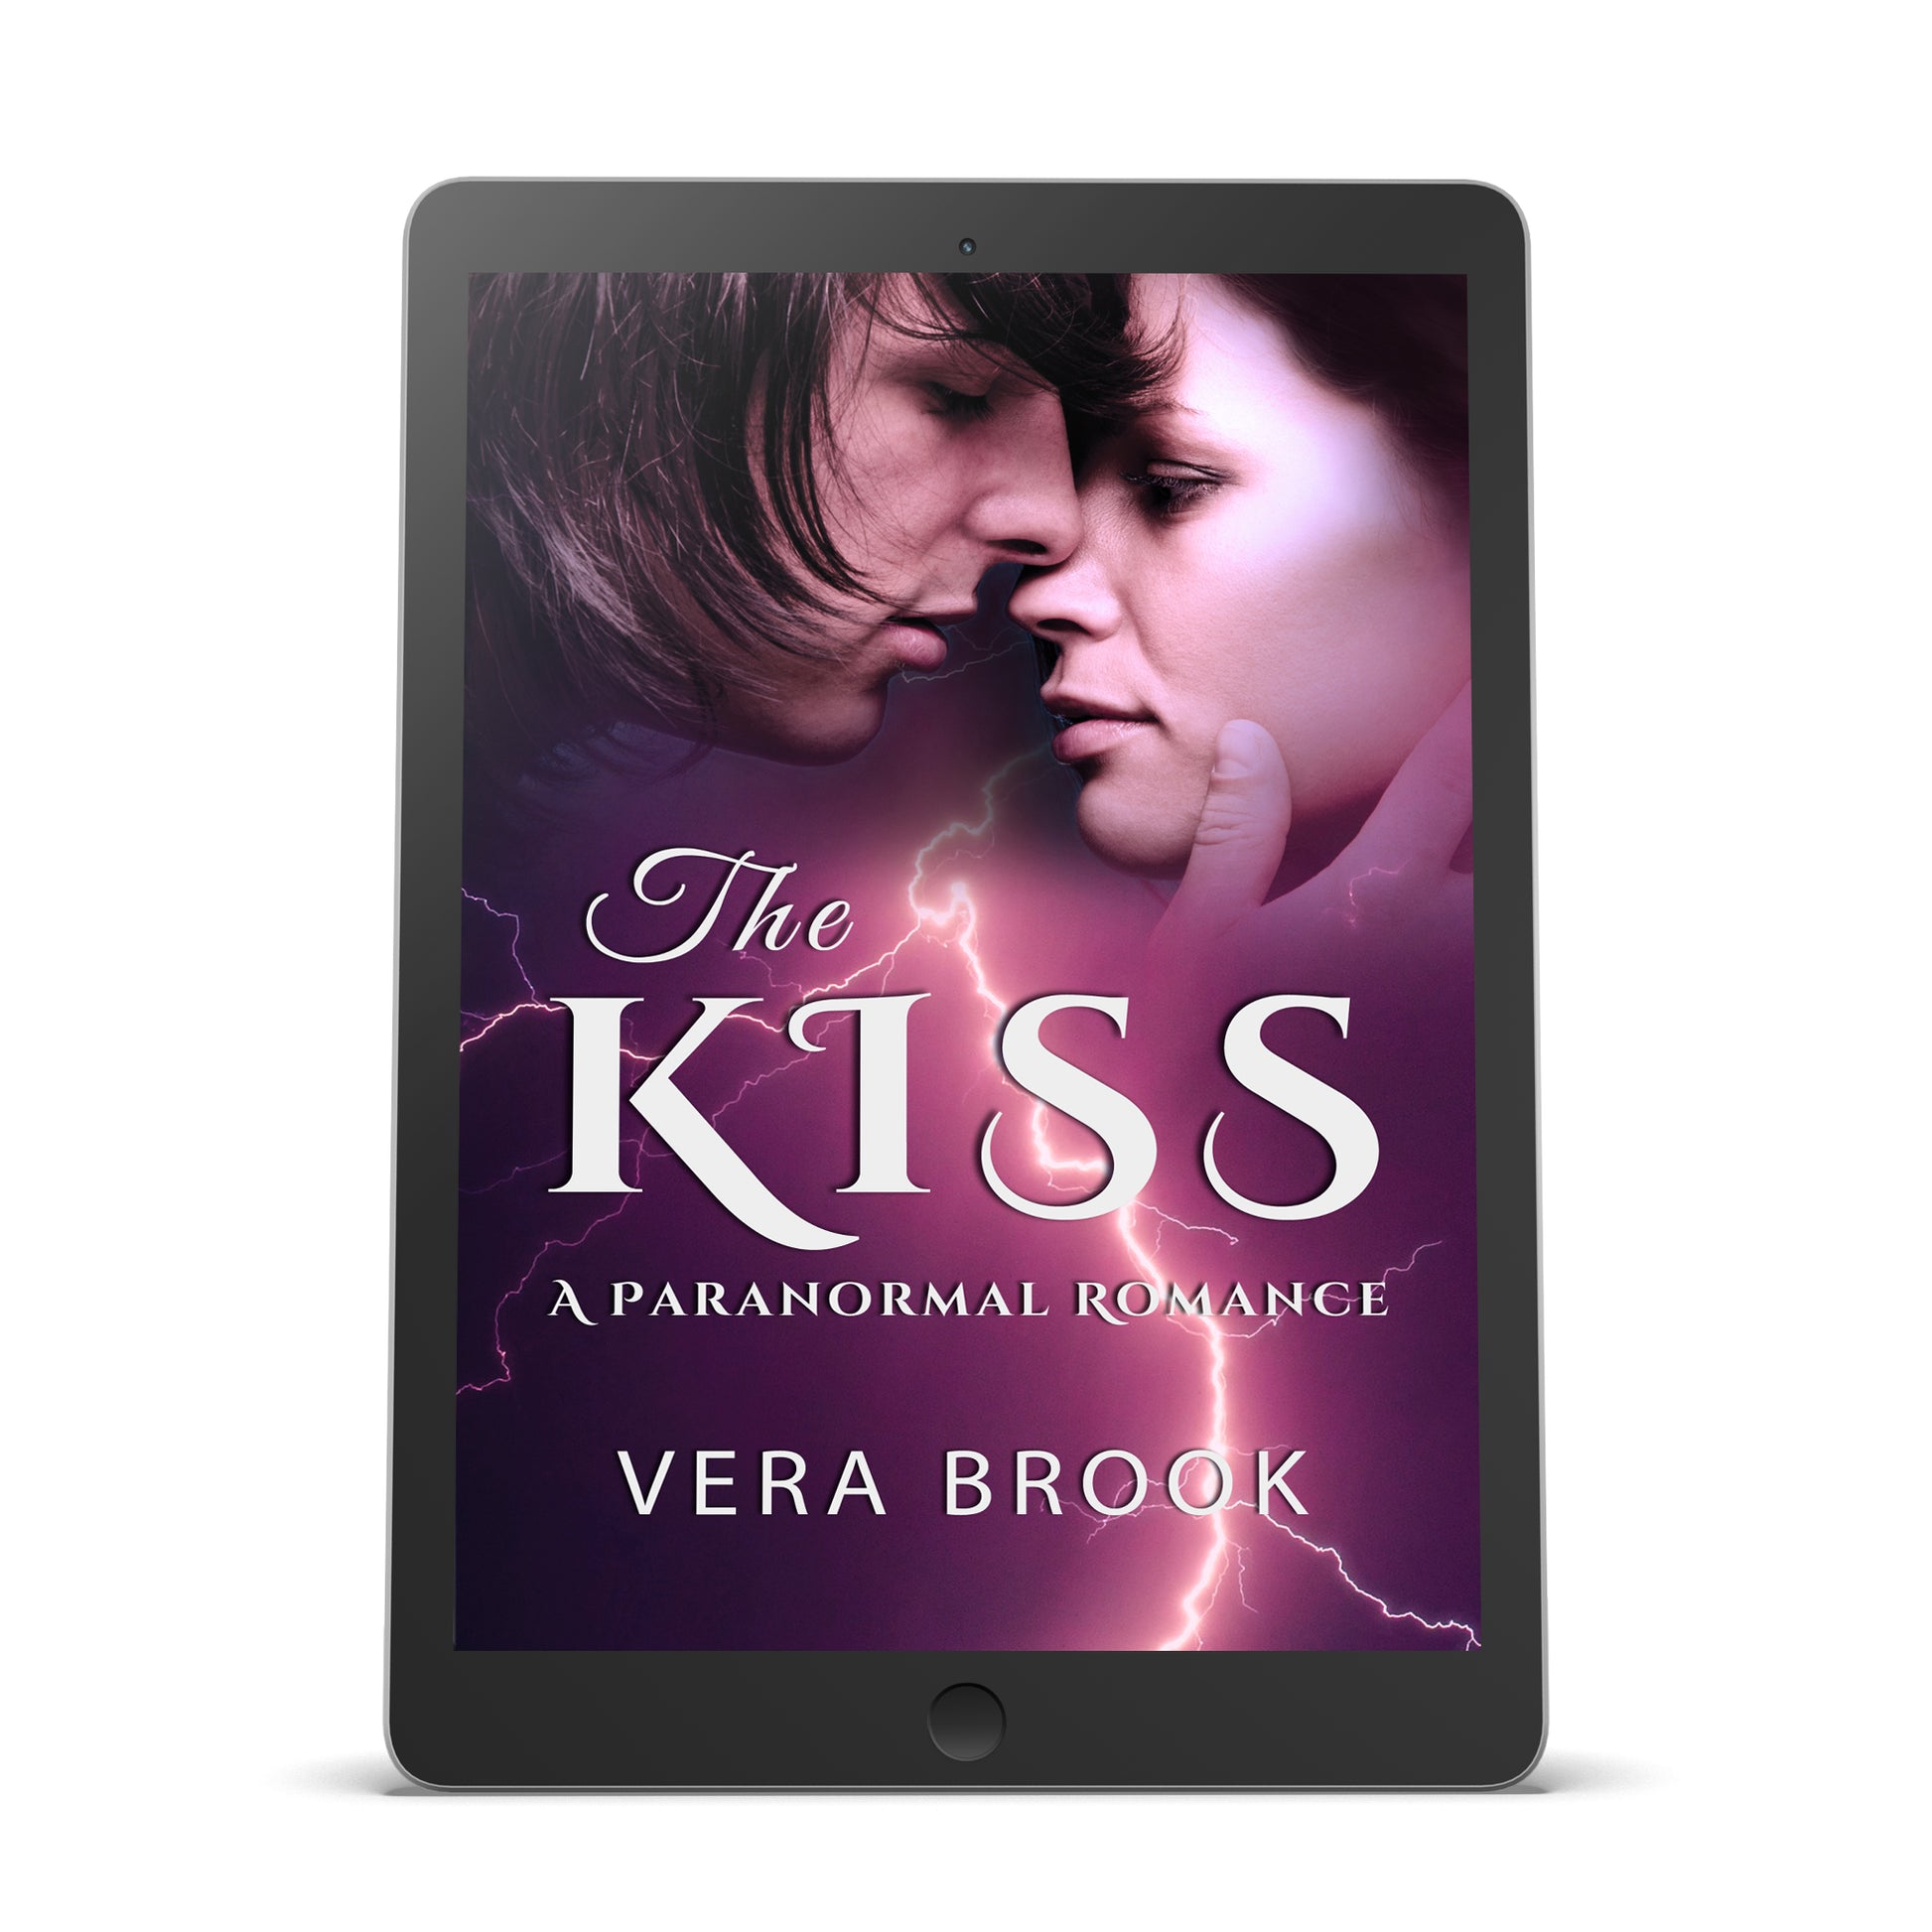 Ebook cover of THE KISS, a paranormal shifter romance by Vera Brook. The cover shows a man about to kiss a woman against the background of purple sky torn by lightning. The title is in a bold, romantic font in white.